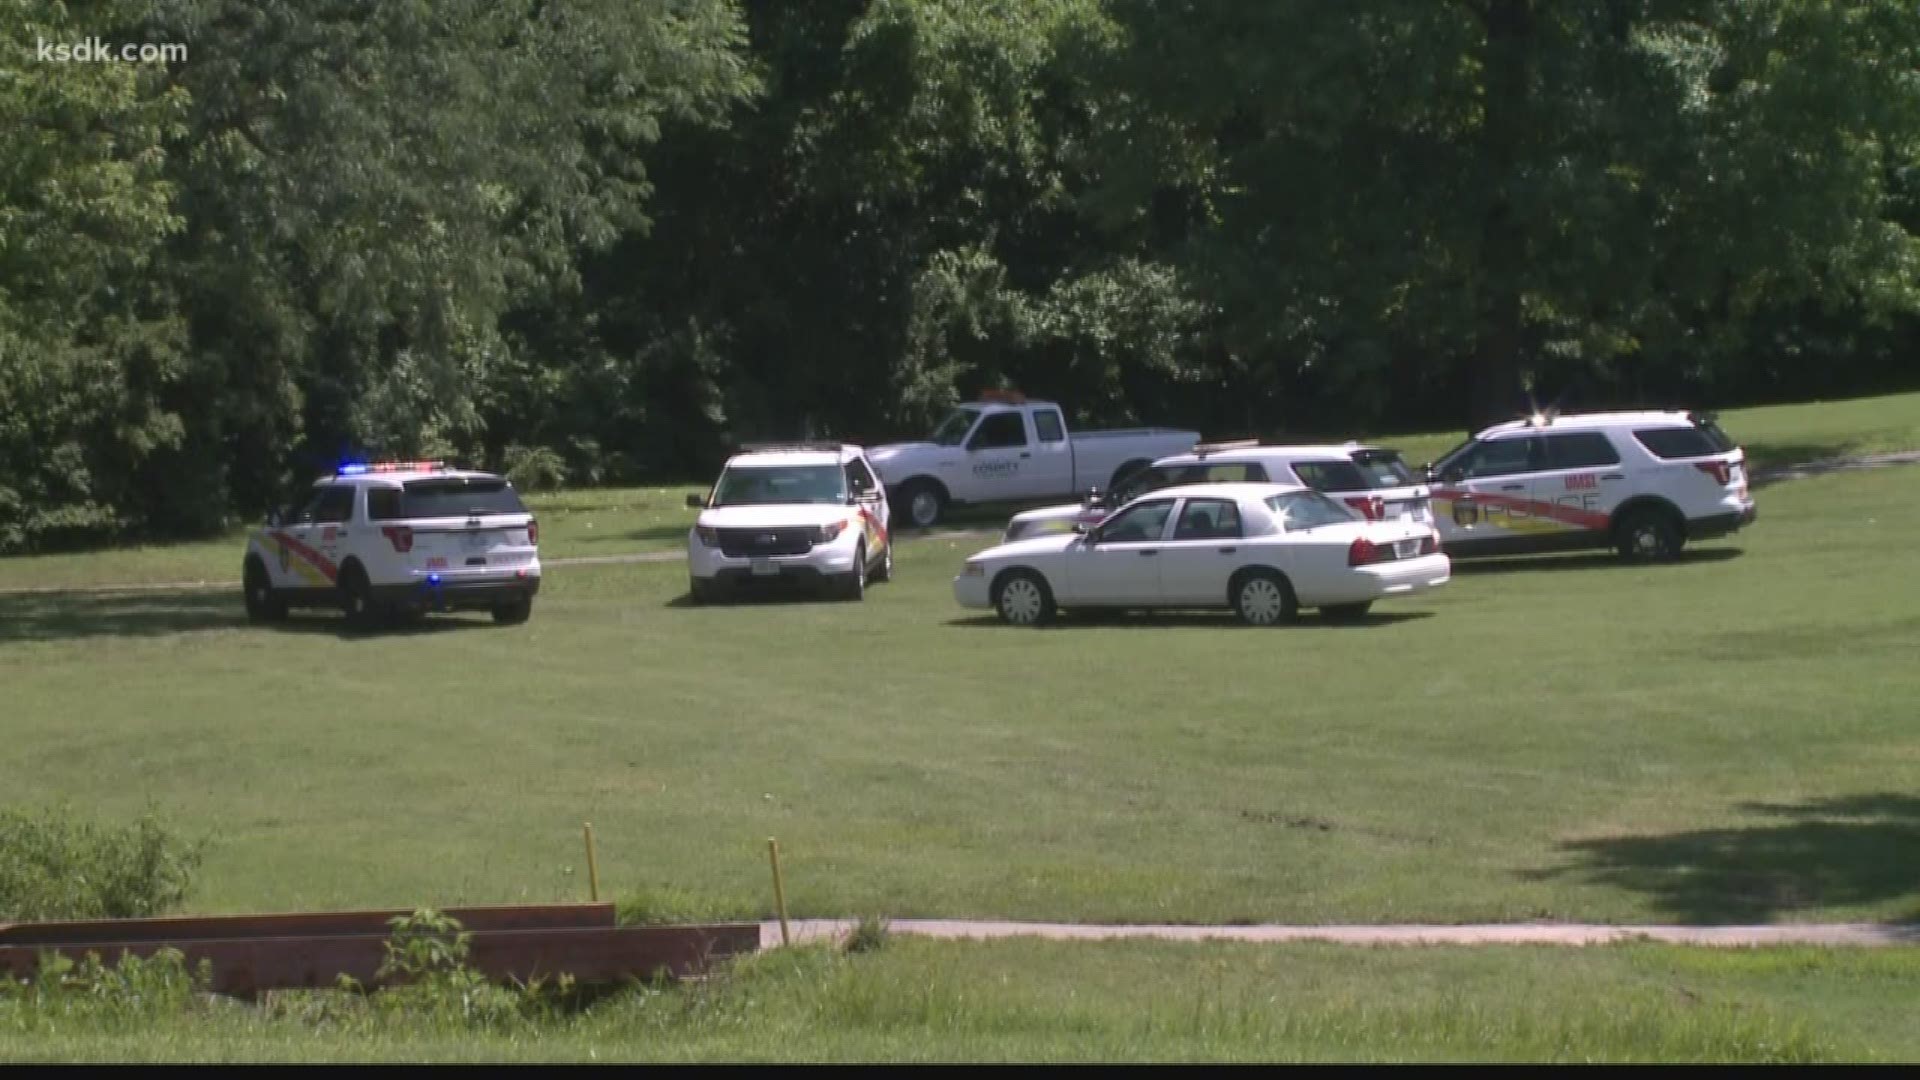 The University of Missouri St. Louis Police Department said officers responded to an incident at the golf club that resulted in the death of a grounds crew member.